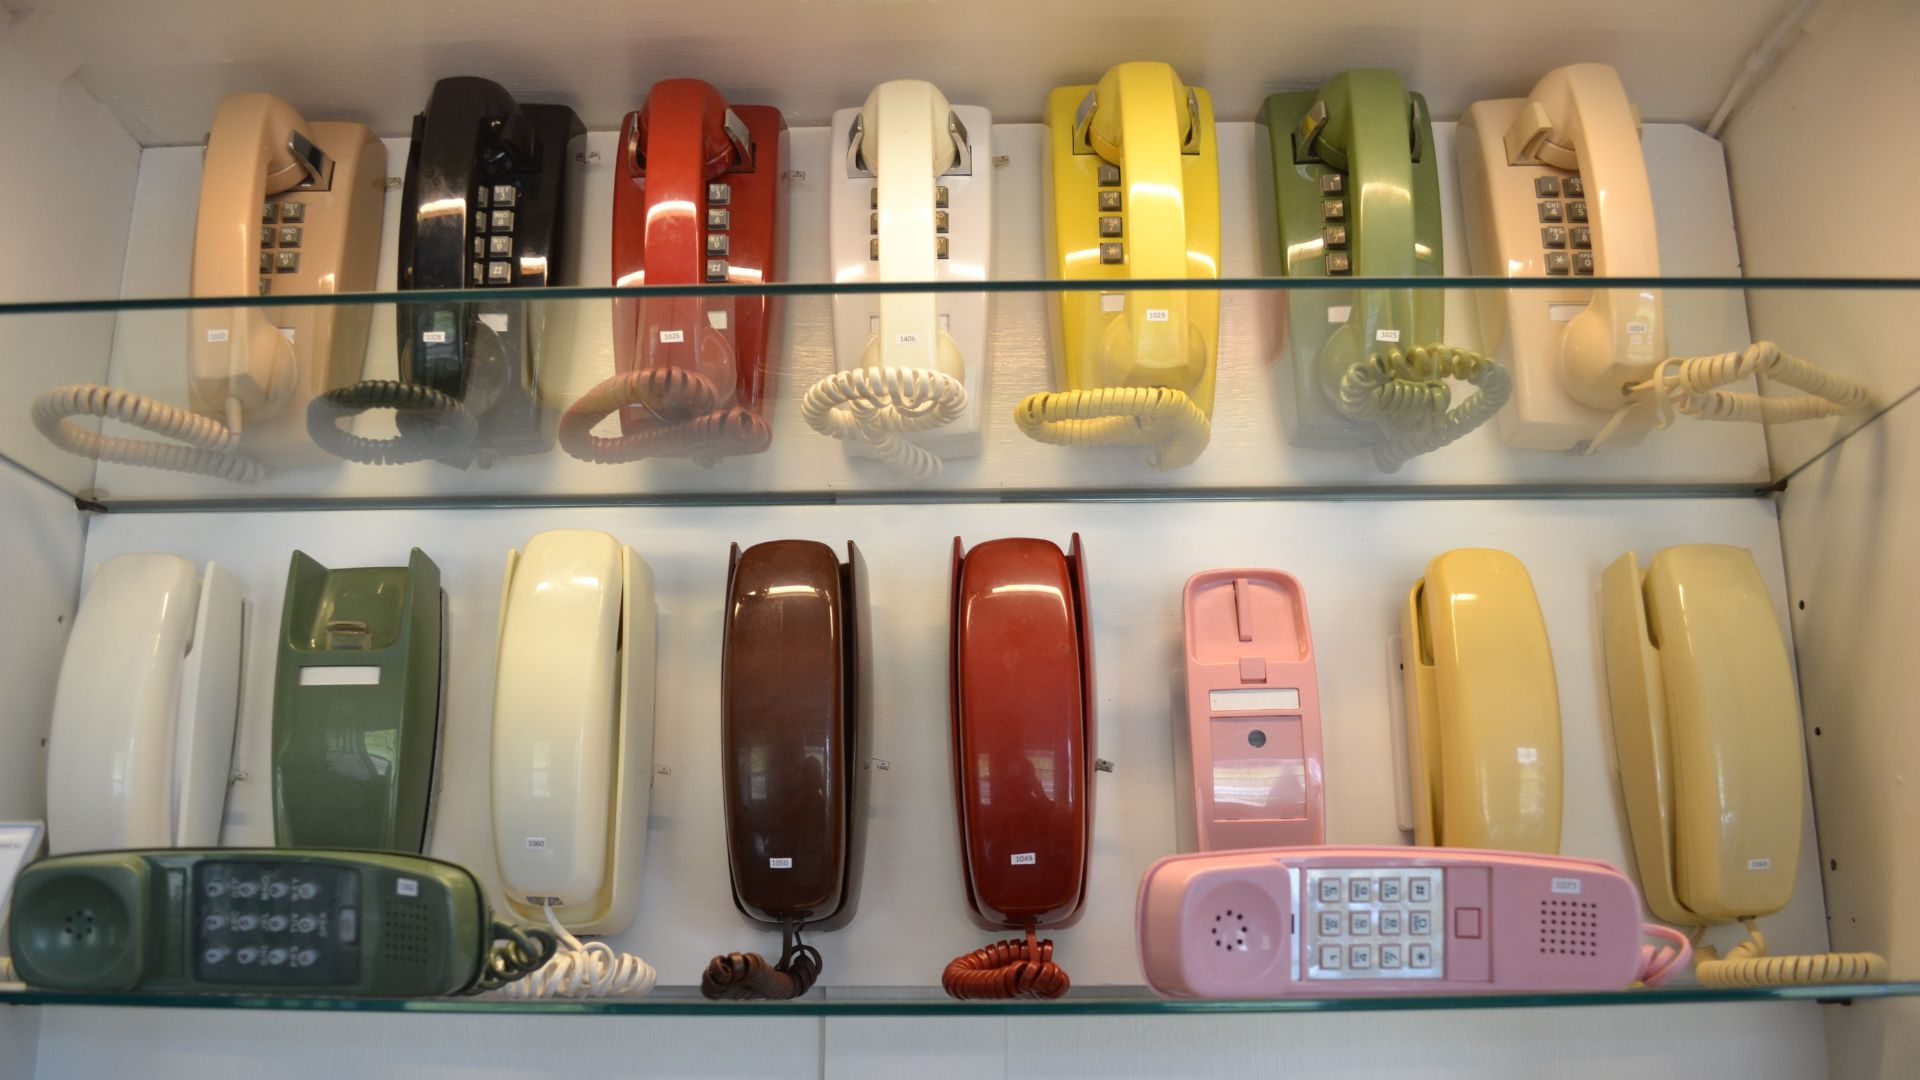 The Jefferson Barracks Telephone Museum features hands-on displays alongside an extensive collection of telephones manufactured from the late 1800s through 2012.